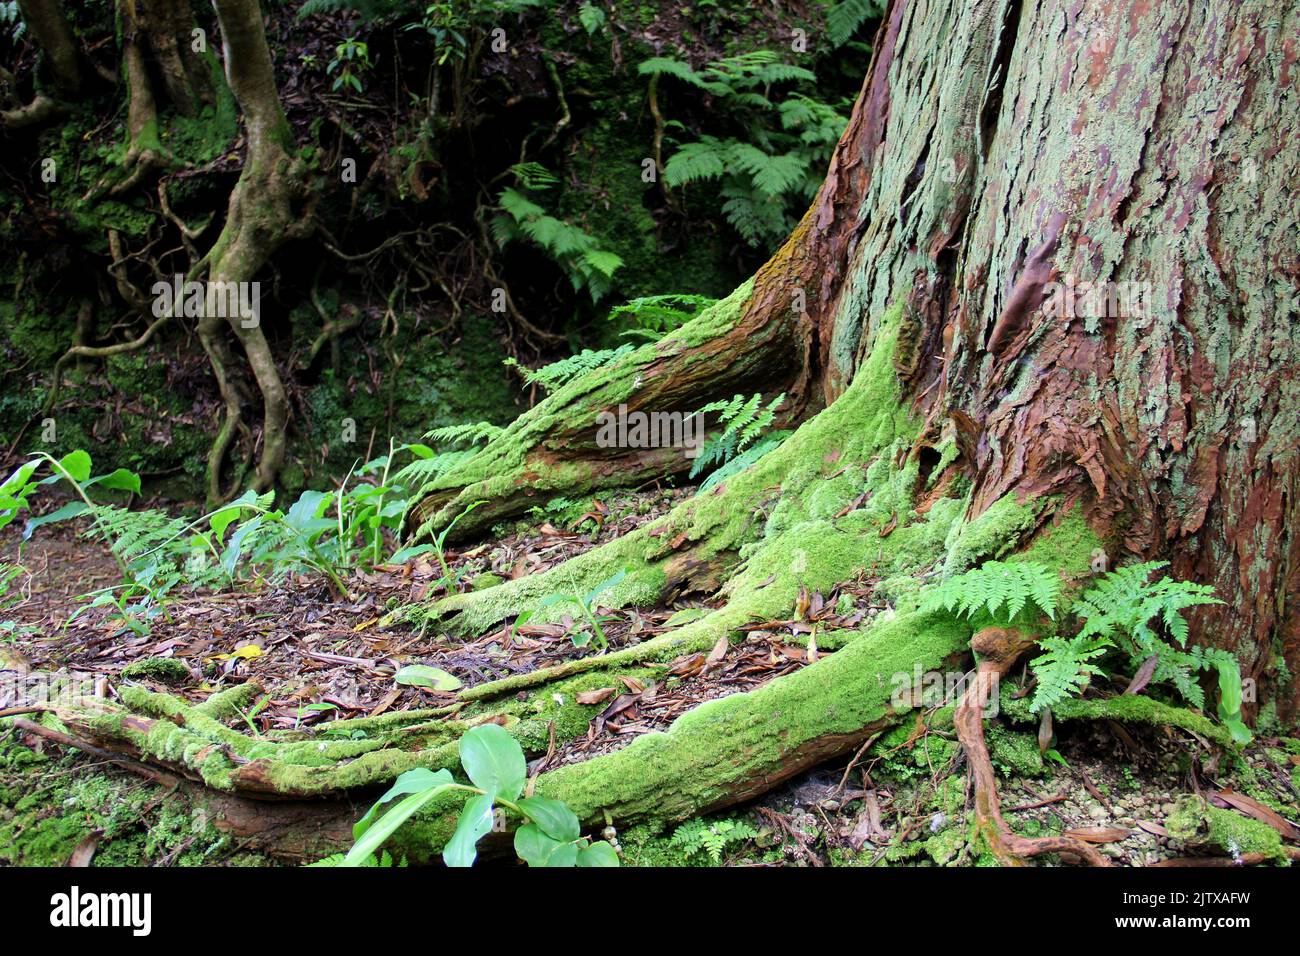 Underbrush of fern and moss around the base of a tree in the forest, Terceira Island, Azores, Portugal Stock Photo